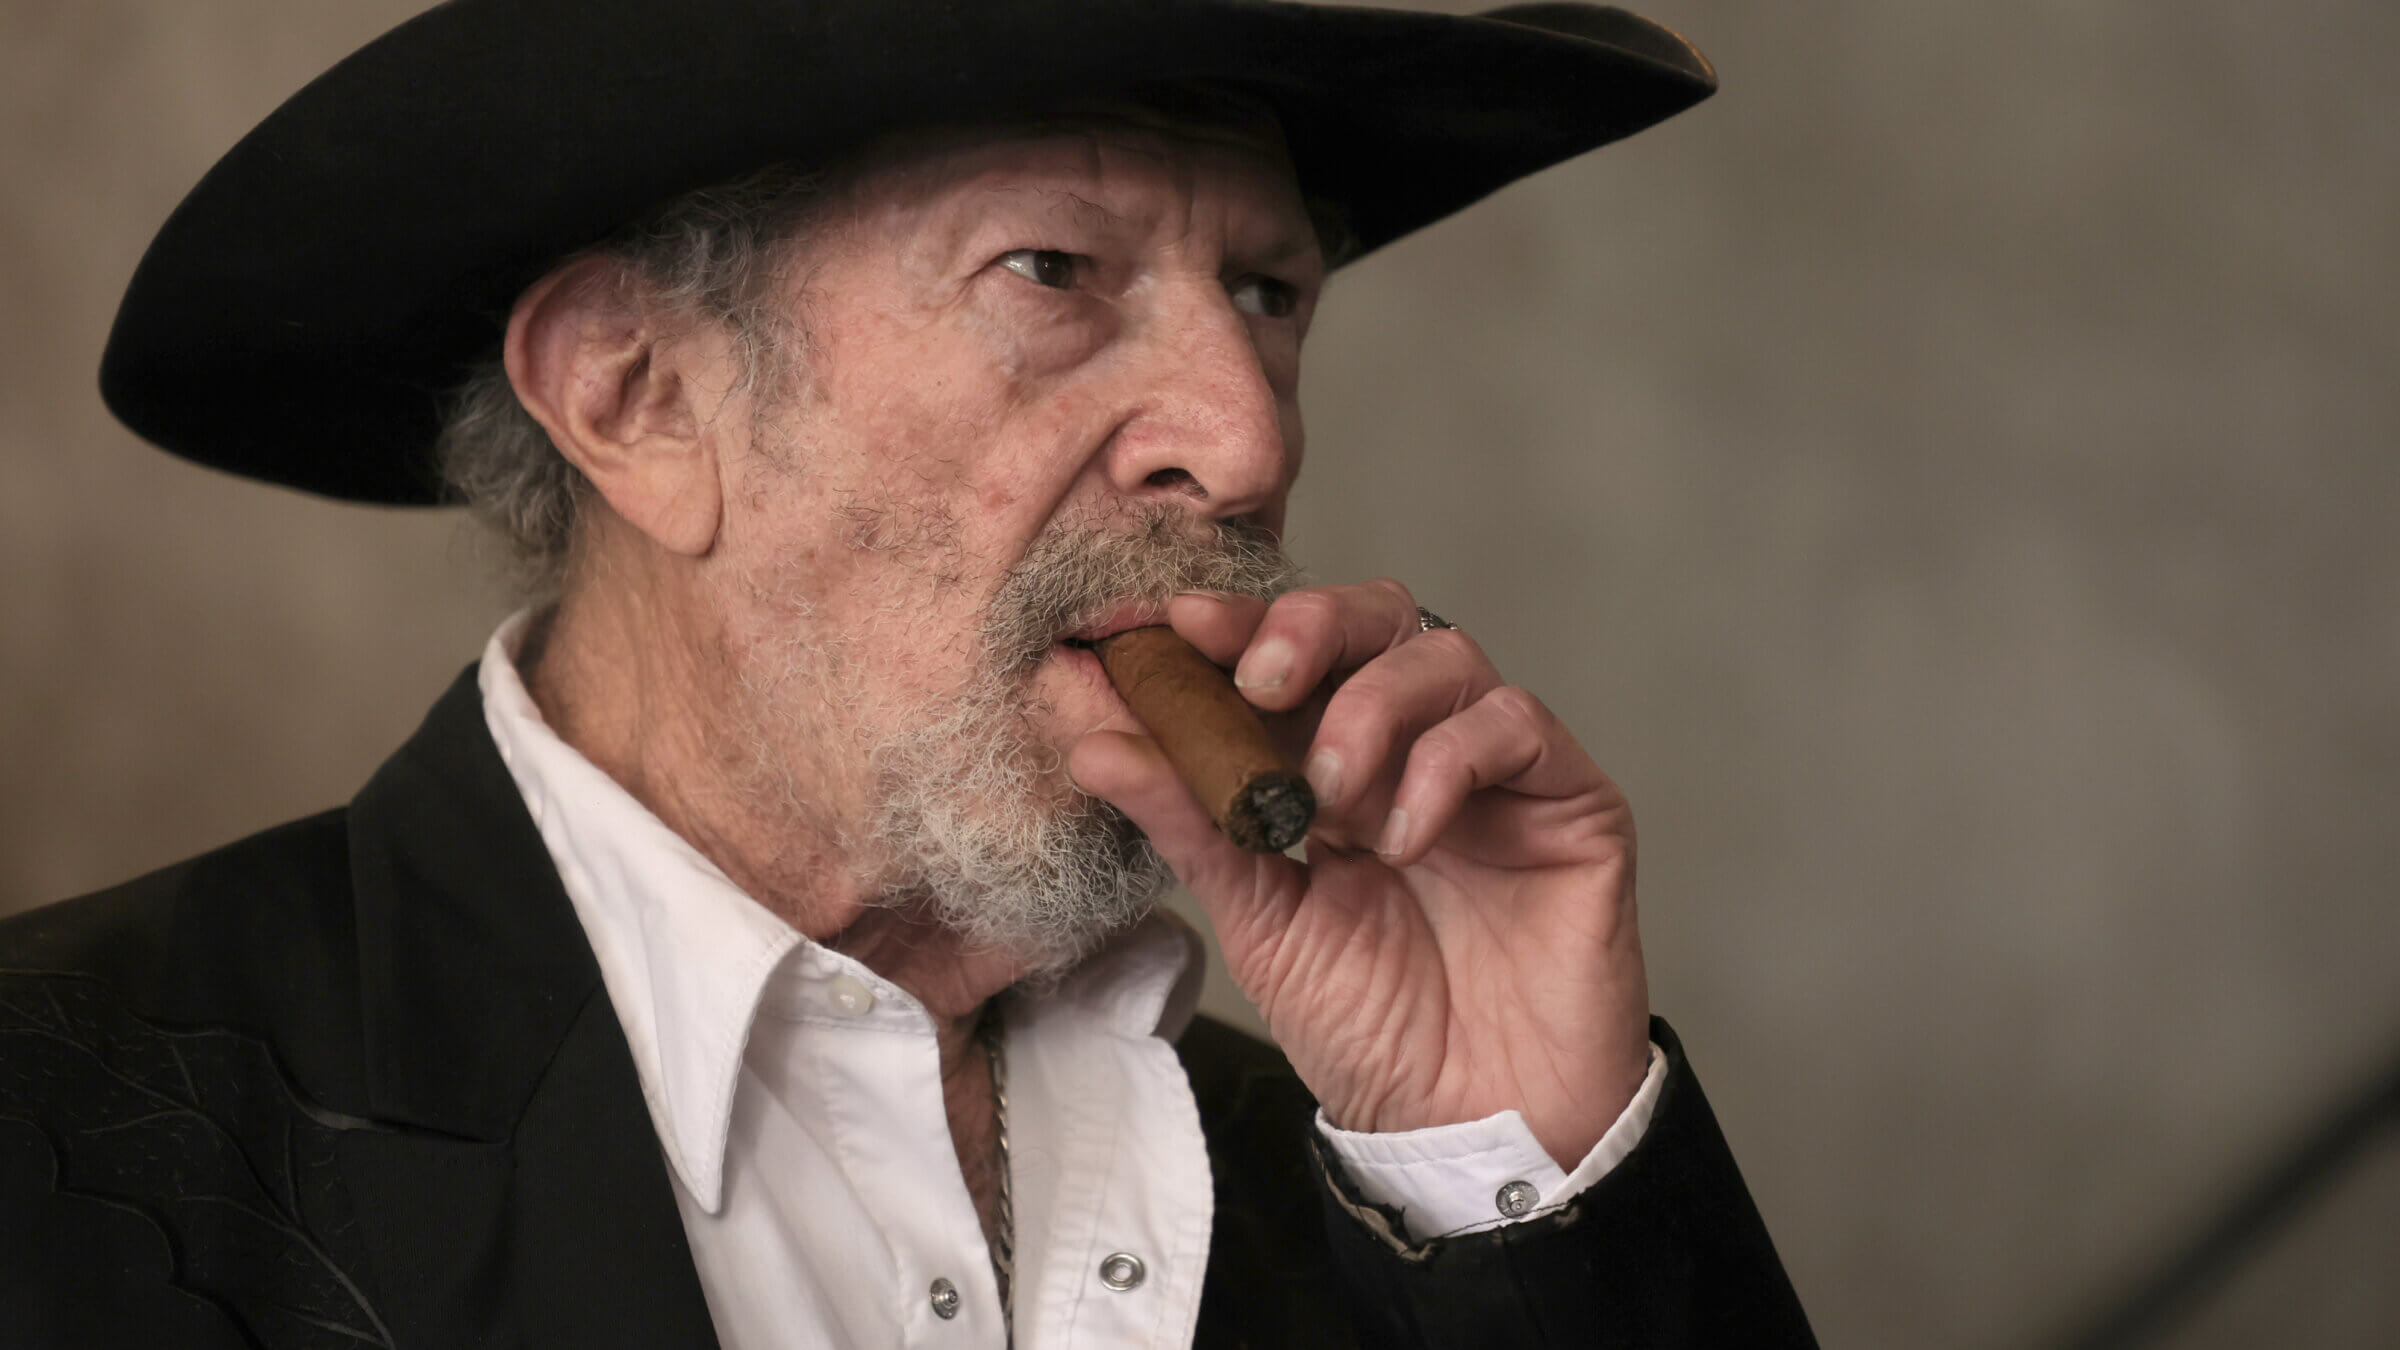 Kinky Friedman at the 2022 SXSW Conference and Festivals at Stateside Theater on March 16, 2022 in Austin, Texas